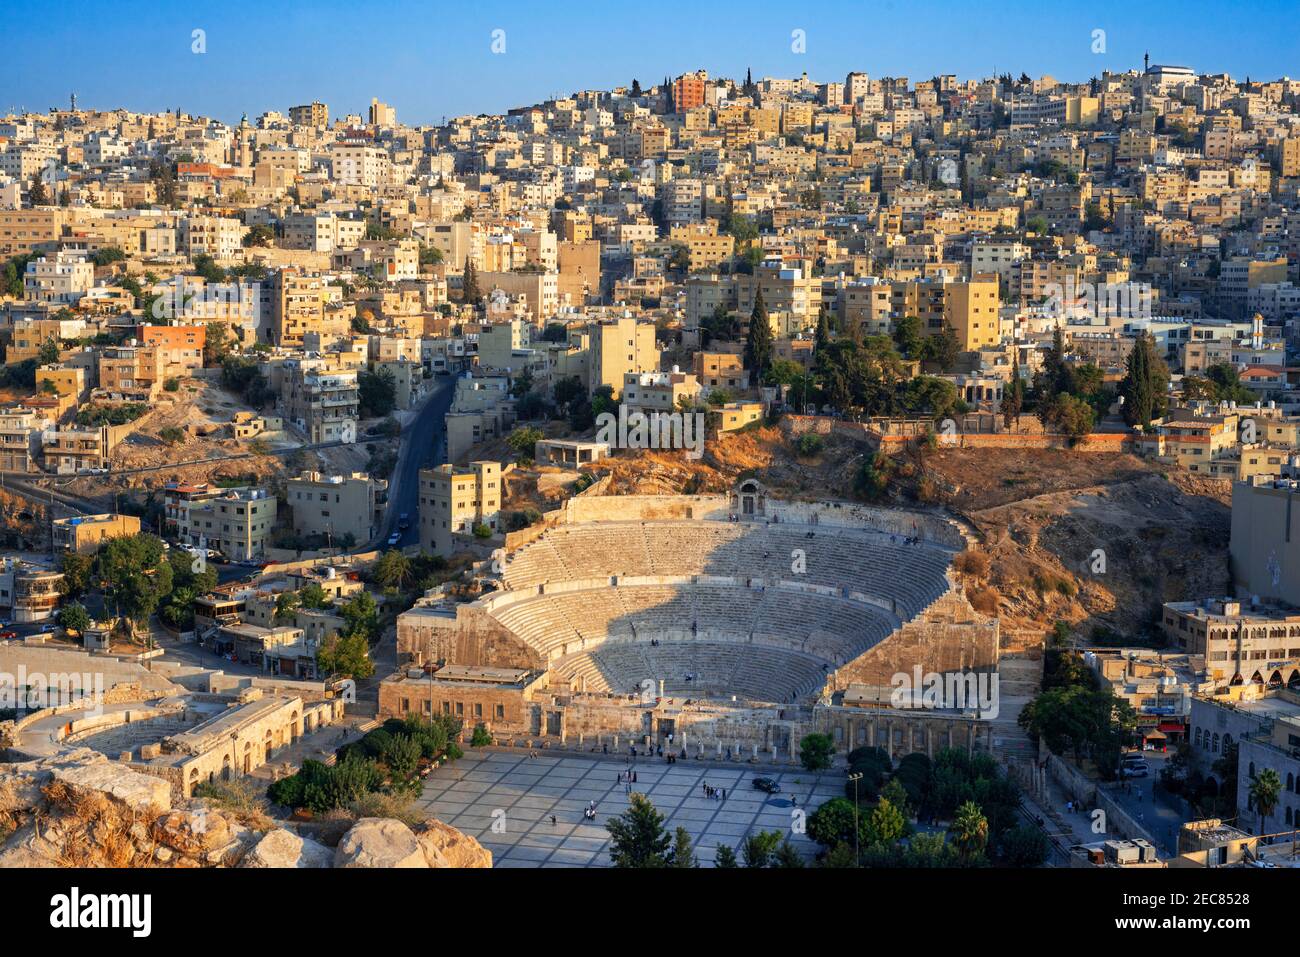 Roman amphitheater and cityscape view of capital Amman, Jordan, Middle East, Asia Stock Photo